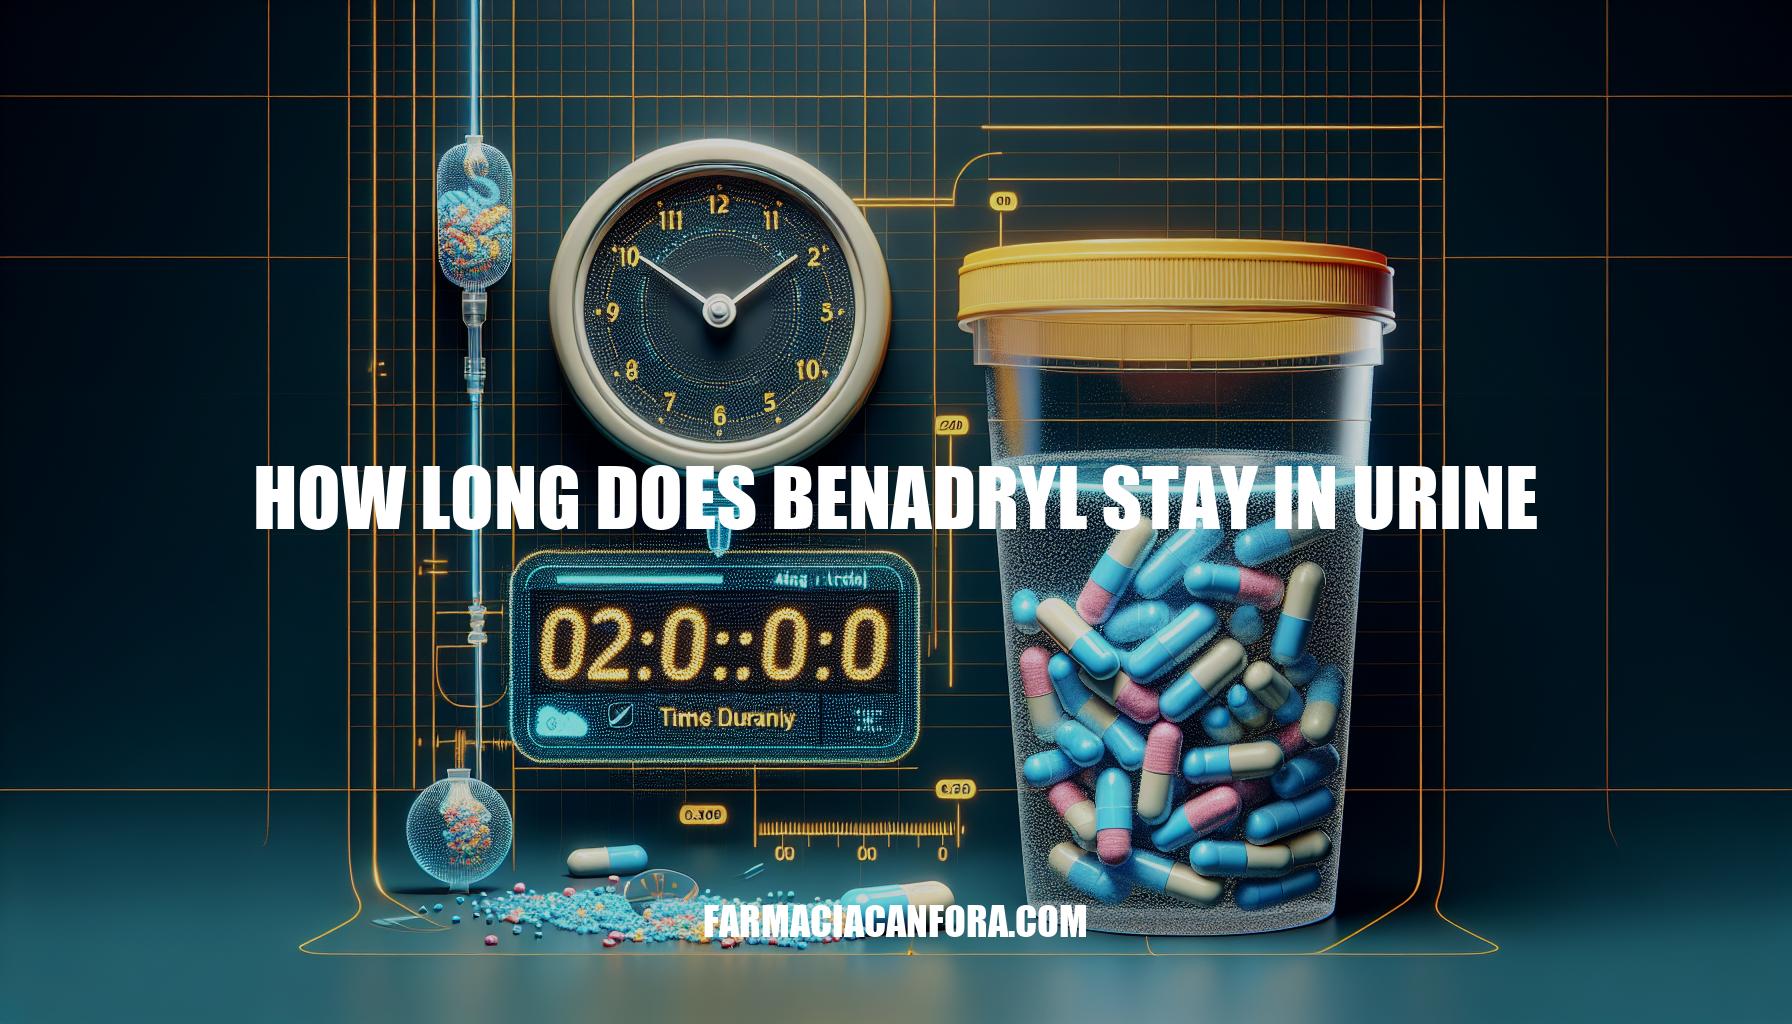 How Long Does Benadryl Stay in Urine